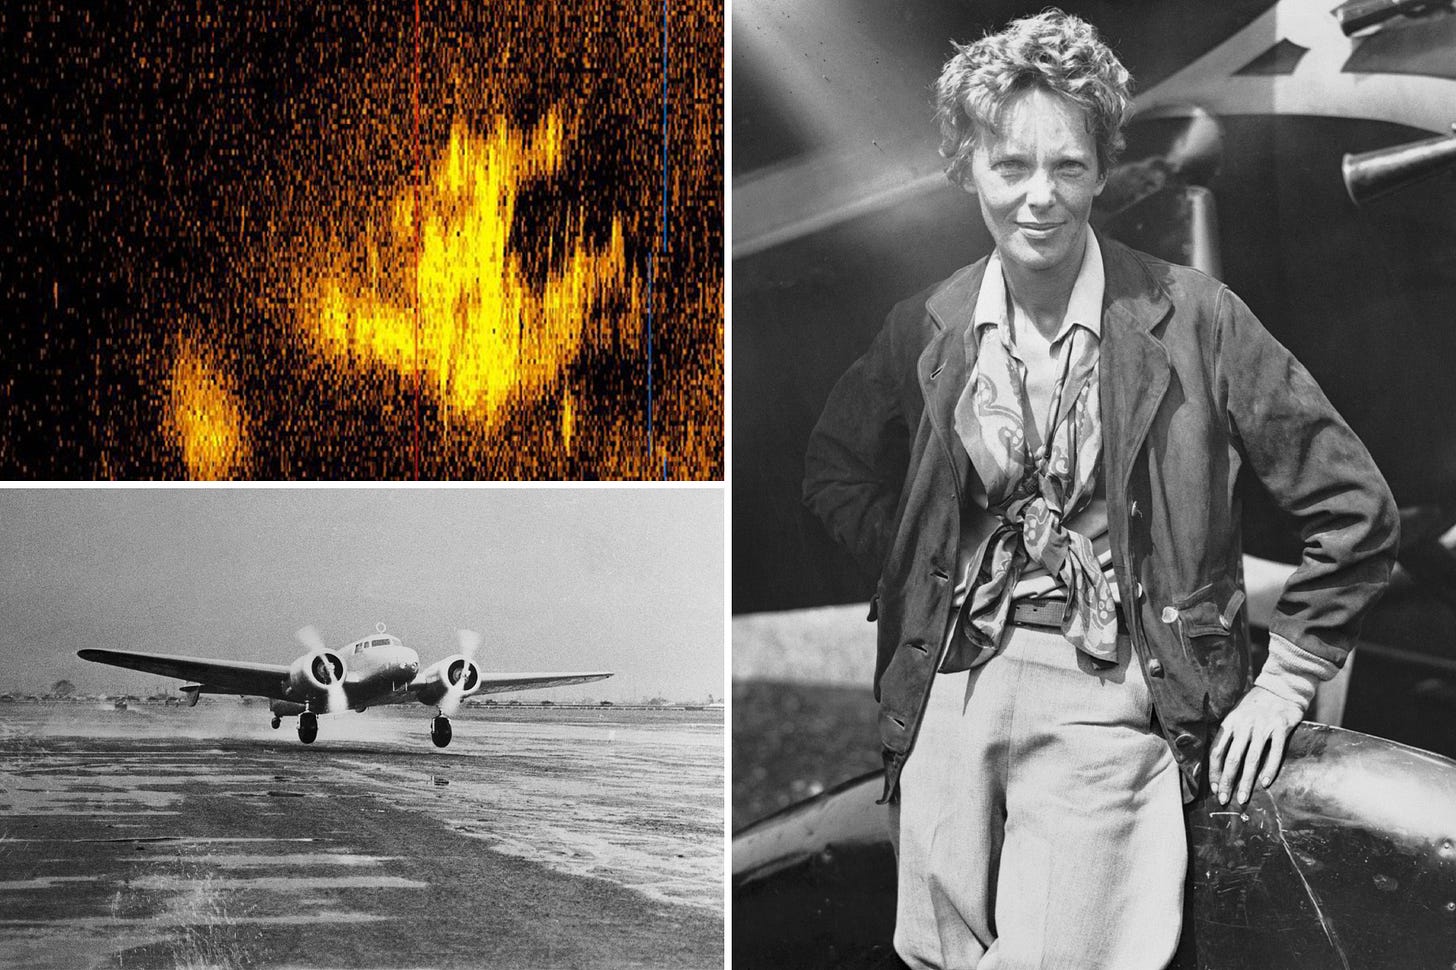 Plane-shaped sonar image may be vital clue in Amelia Earhart mystery